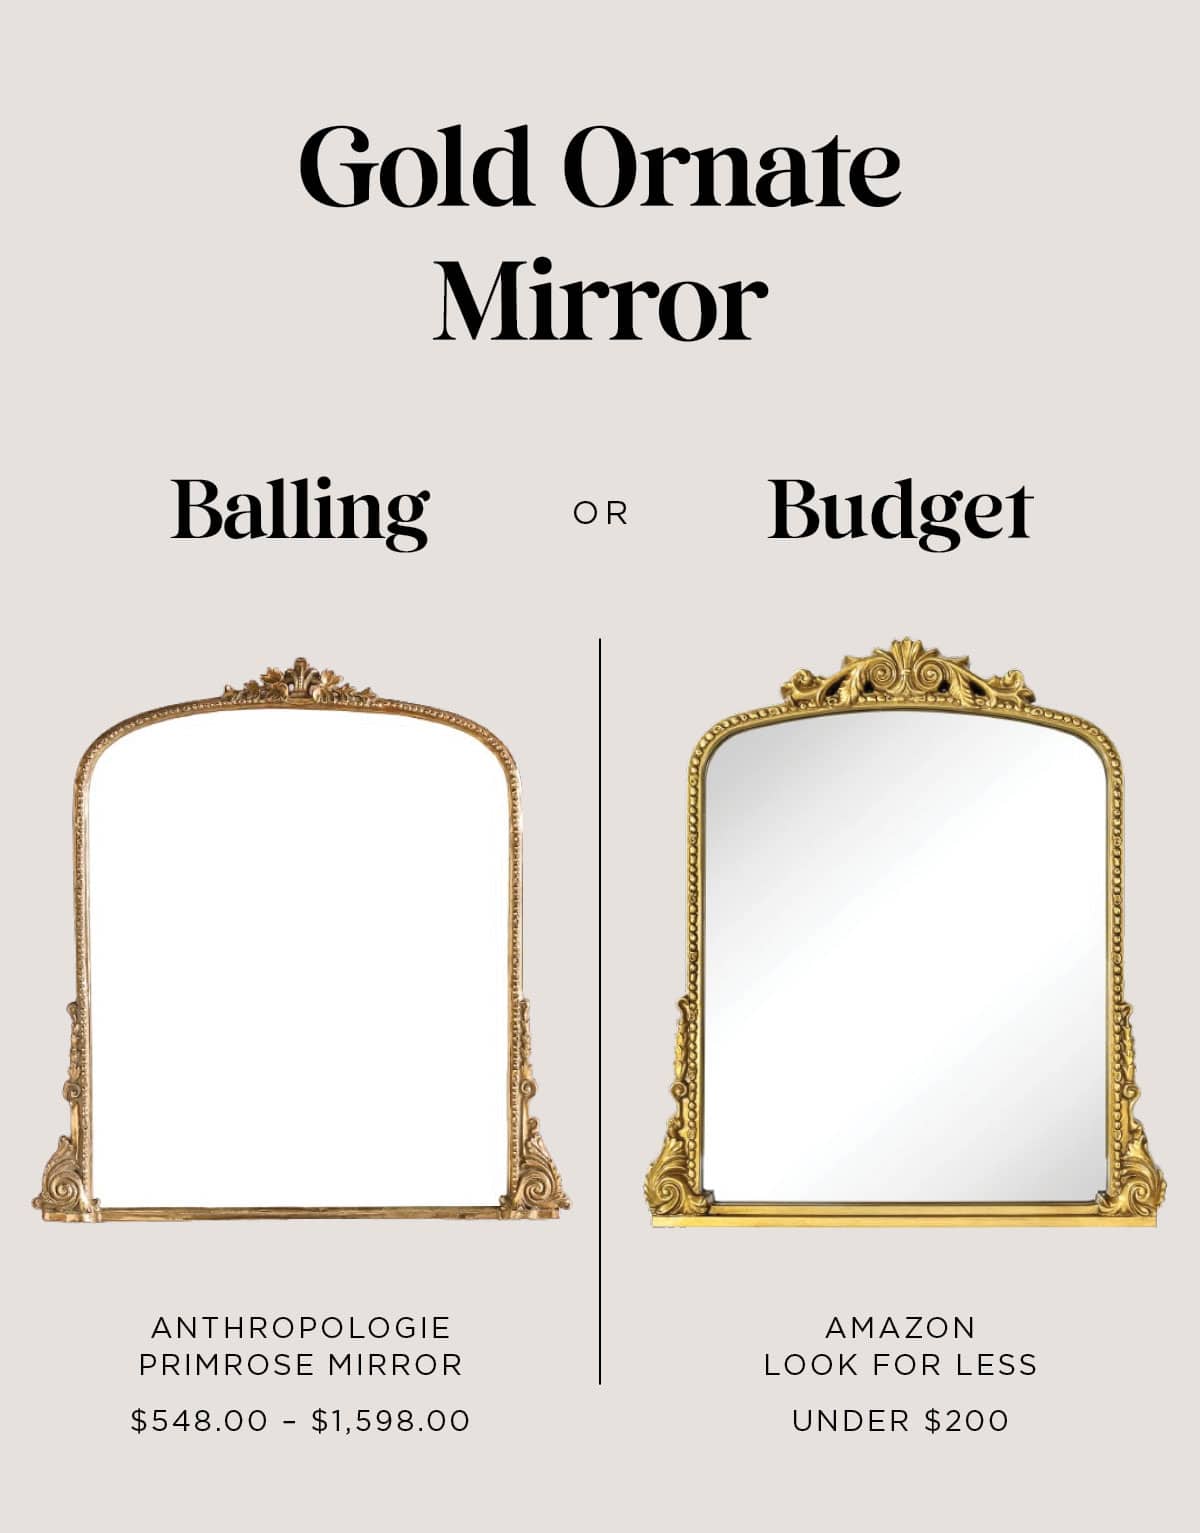 Get The Look For Less - Anthropologie Mirror Dupe